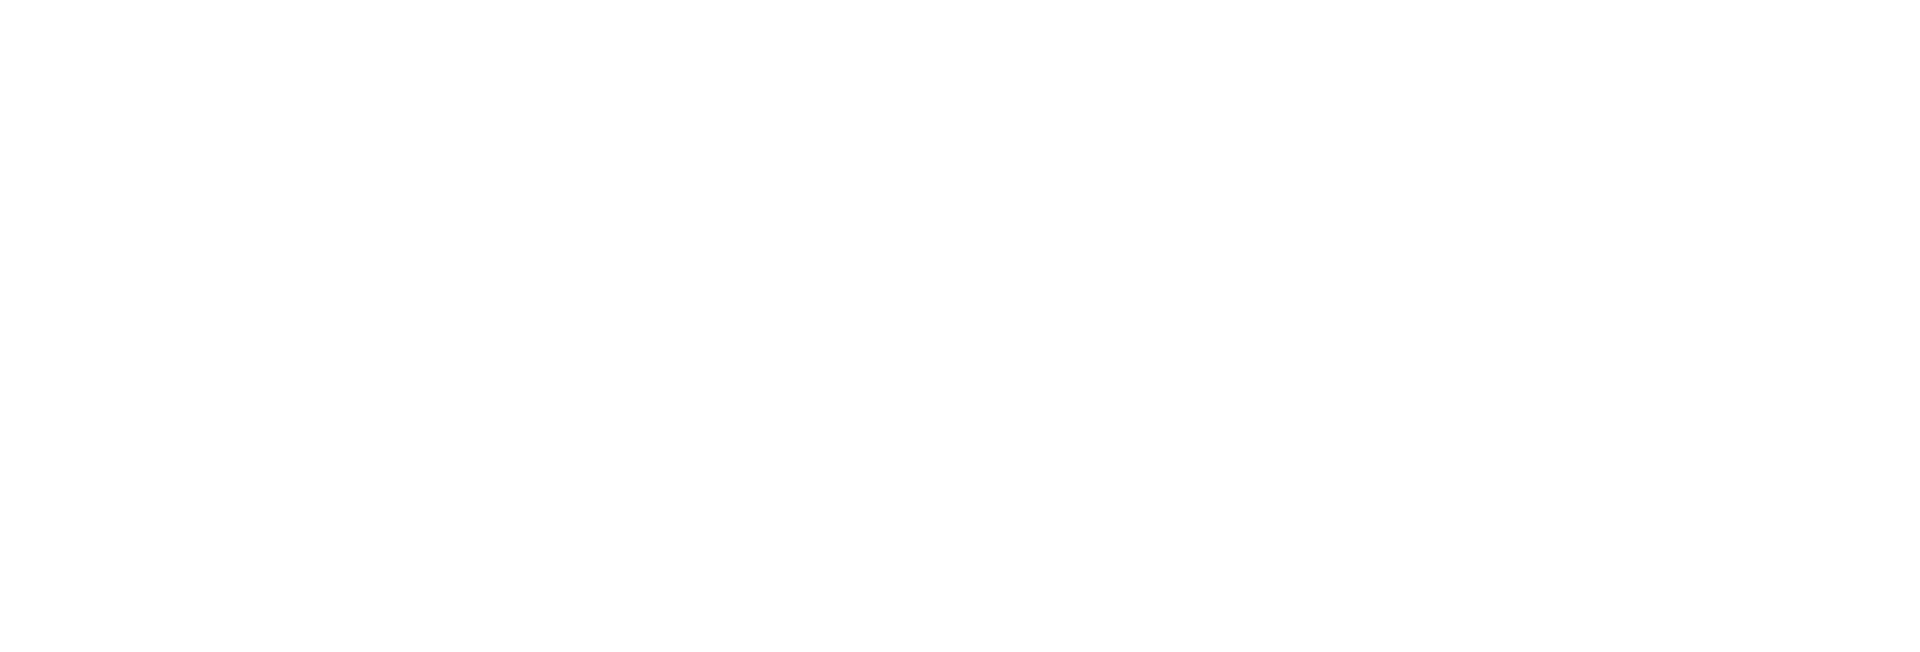 July_Fathers_Day_Web_LP_TEXT_ONLY_99dd9476cf.png